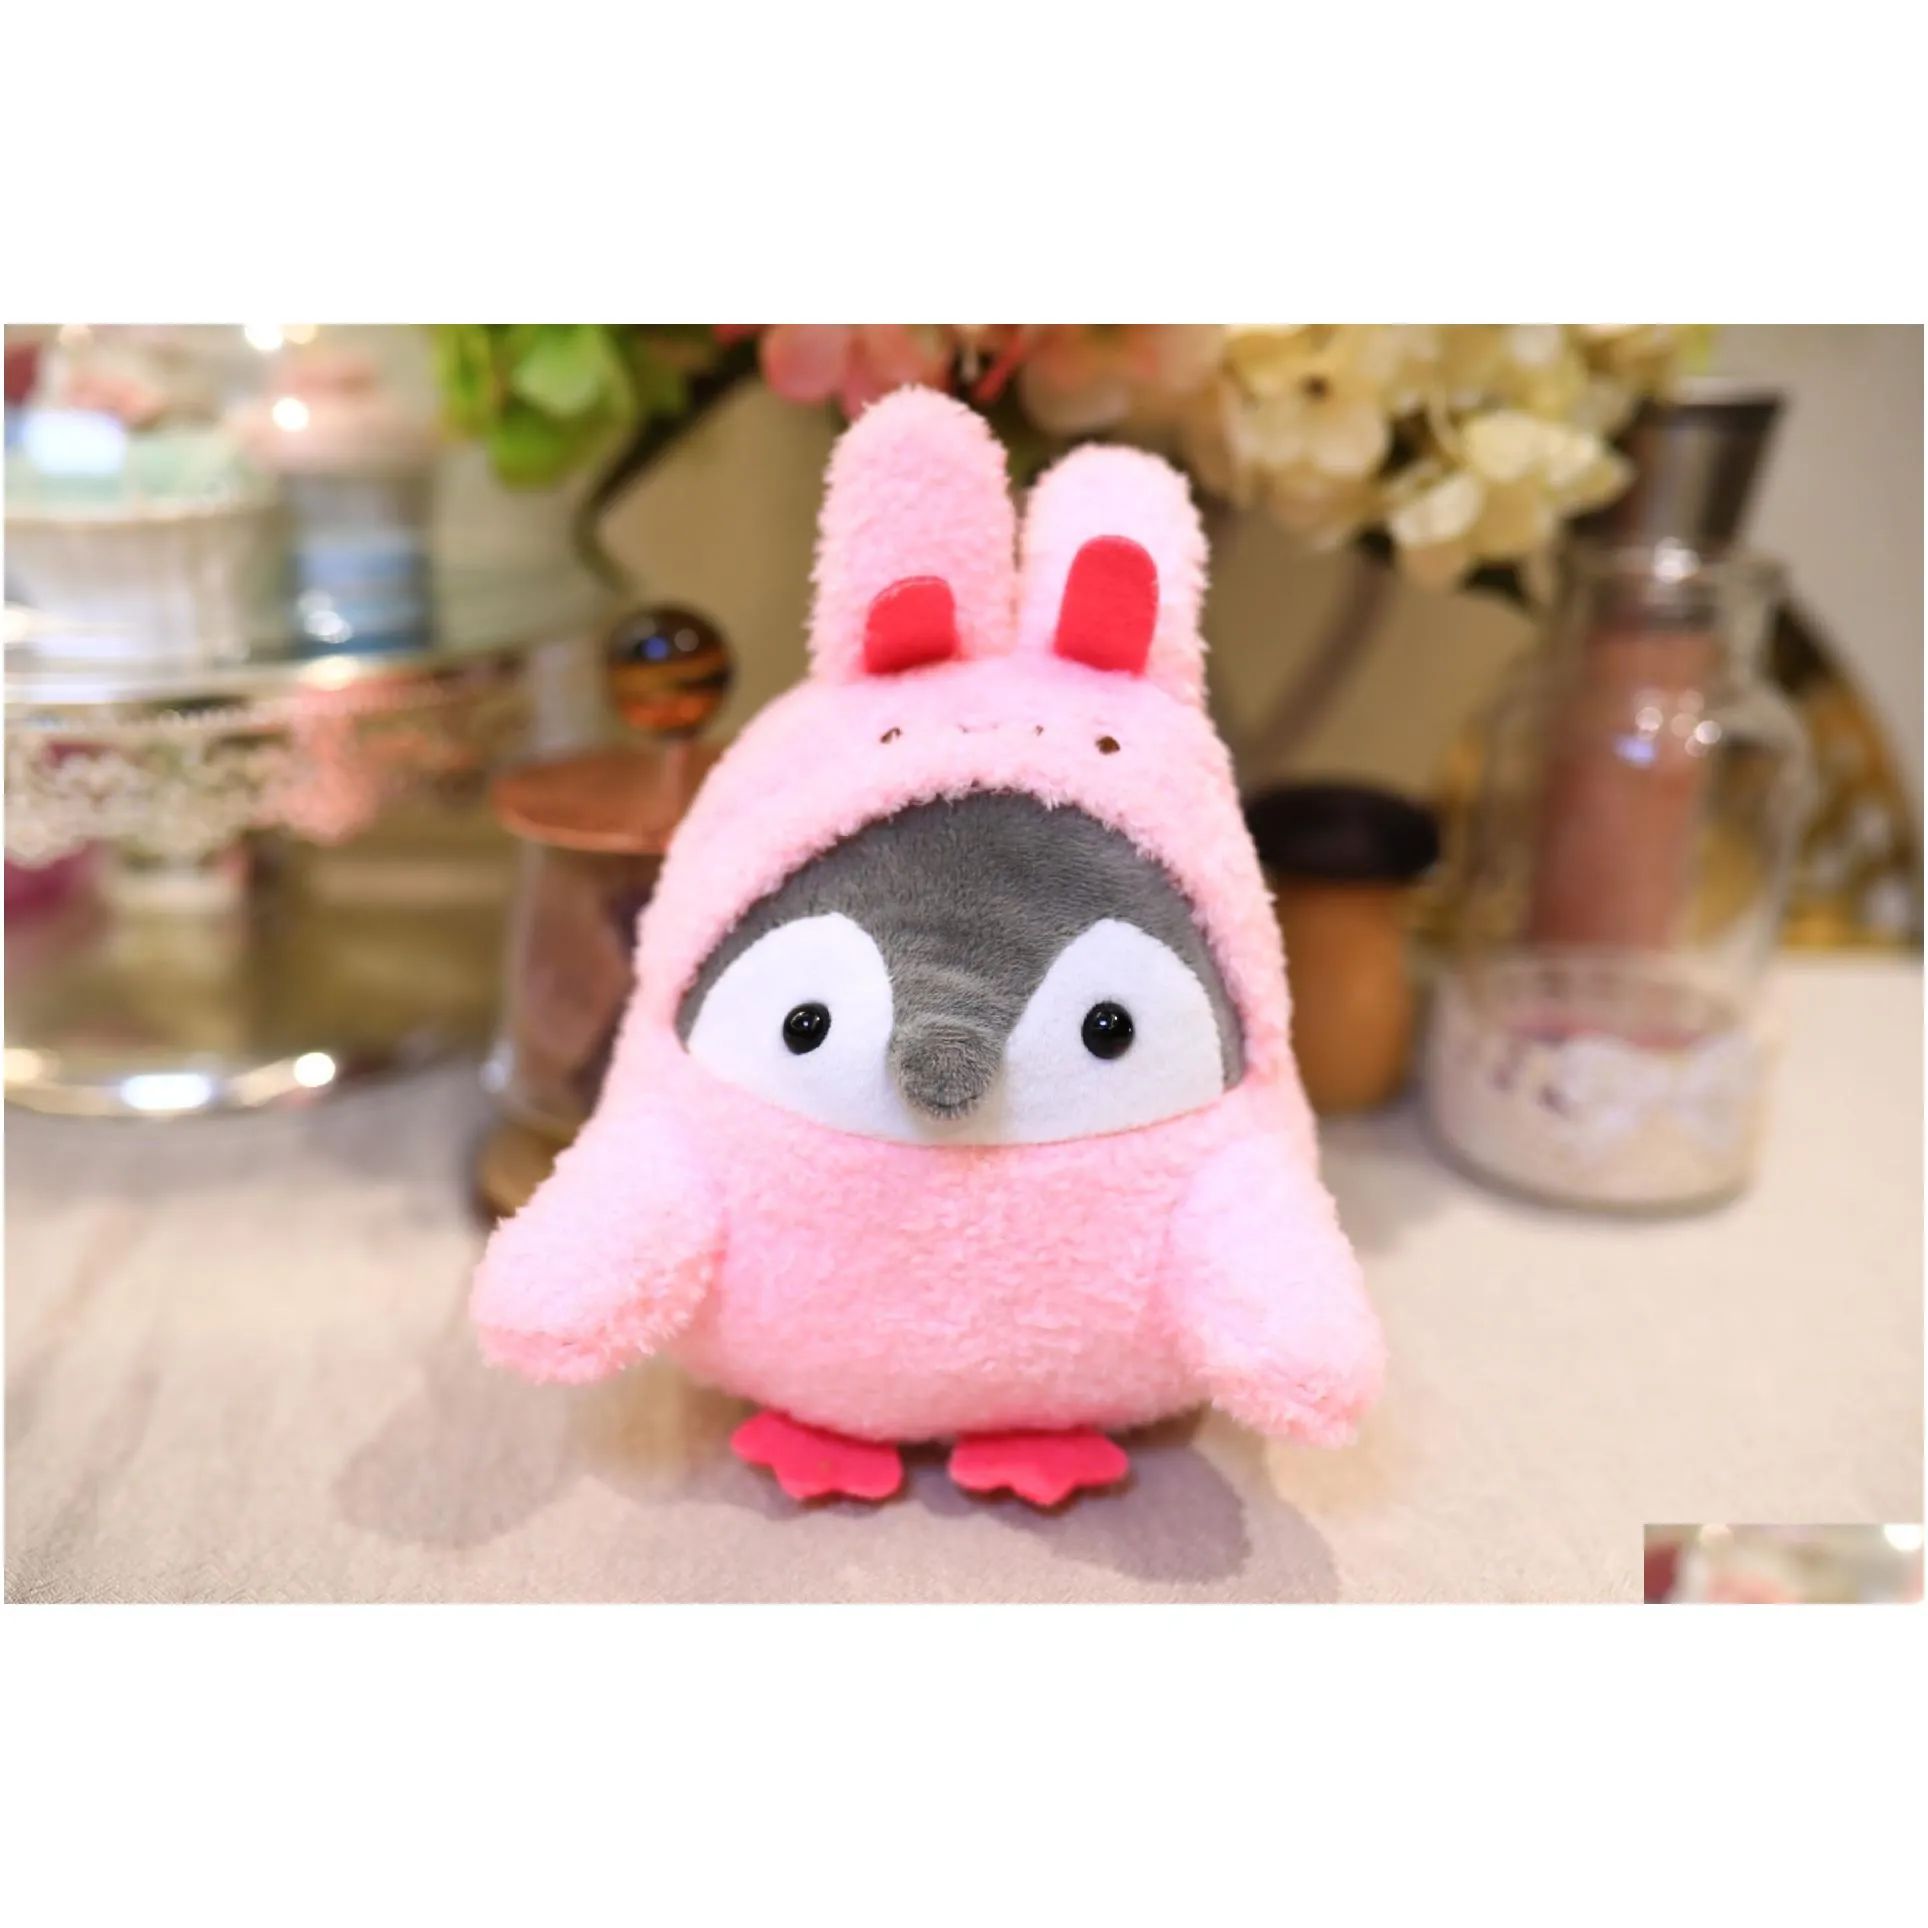 Cute Penguin 20CM Doll New Scratchy Doll Toy Company Night Market Stall Gift 8-inch 7-inch Gift Christmas Keychain